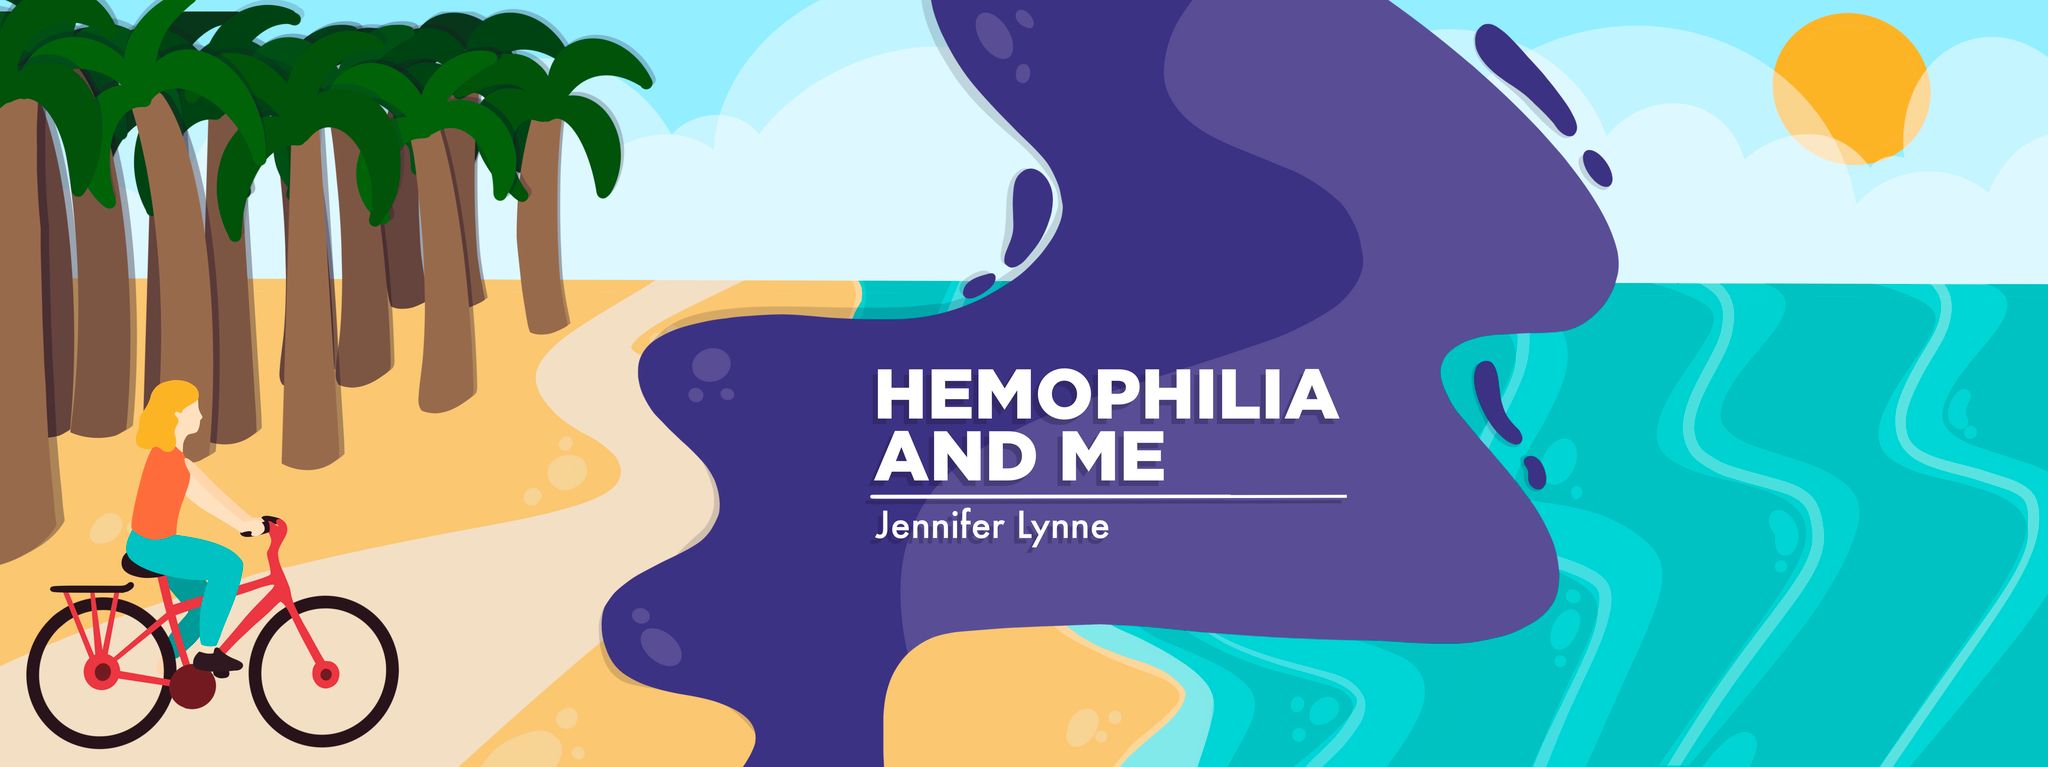 shared decision making in healthcare | Hemophilia News Today | banner image for 